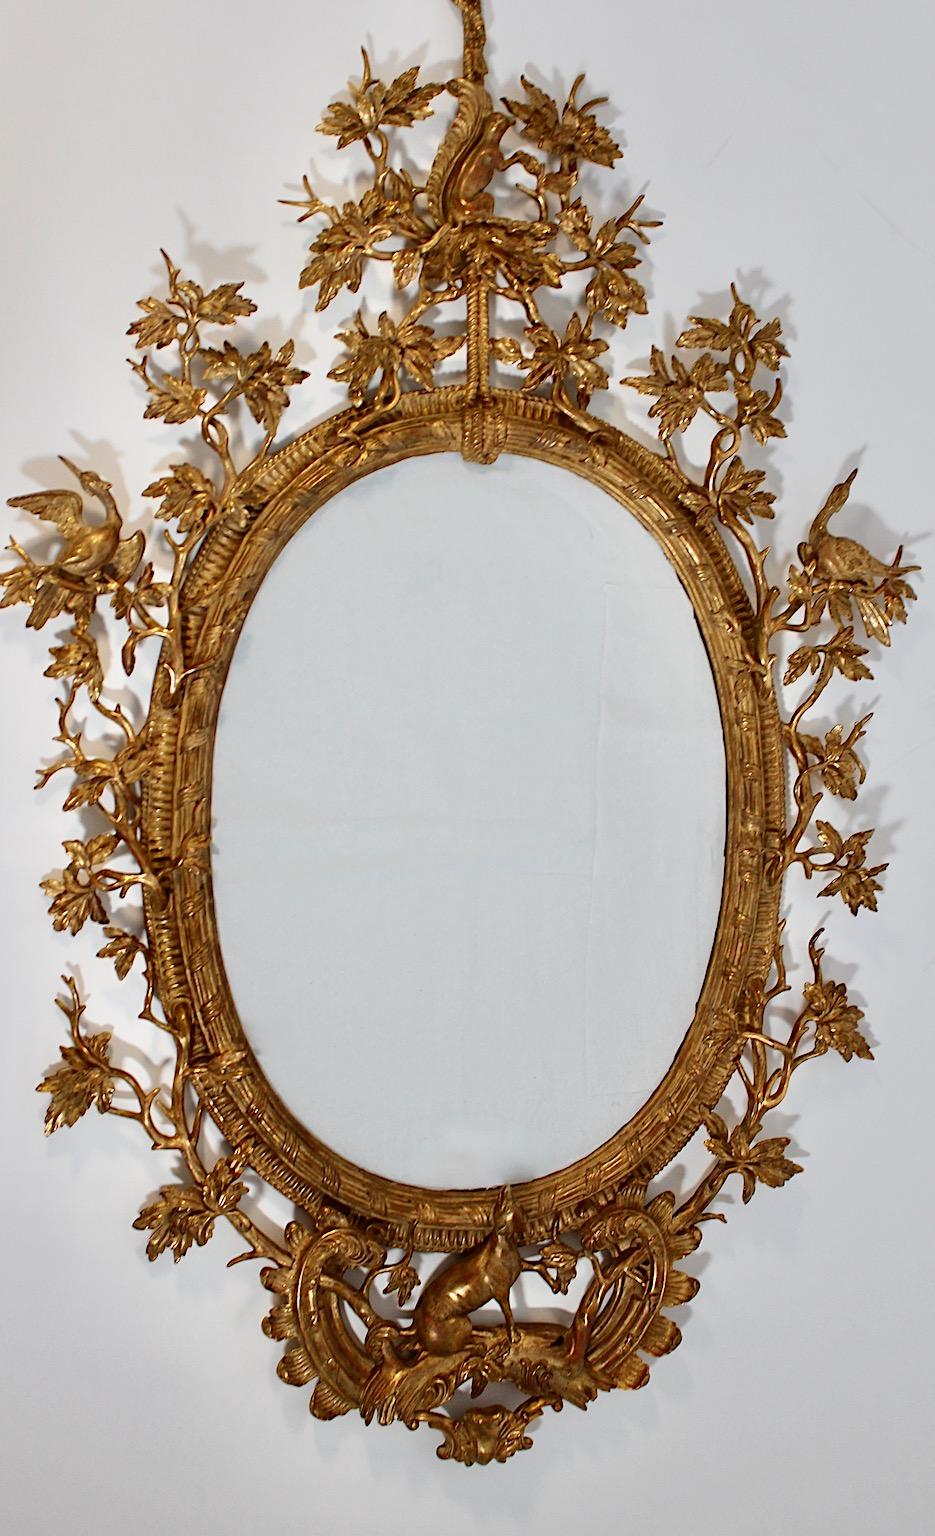 Hand-Carved Antique Authentic Gilt Carved Wood Wall Mirror Style Thomas Johnson circa 1830 For Sale